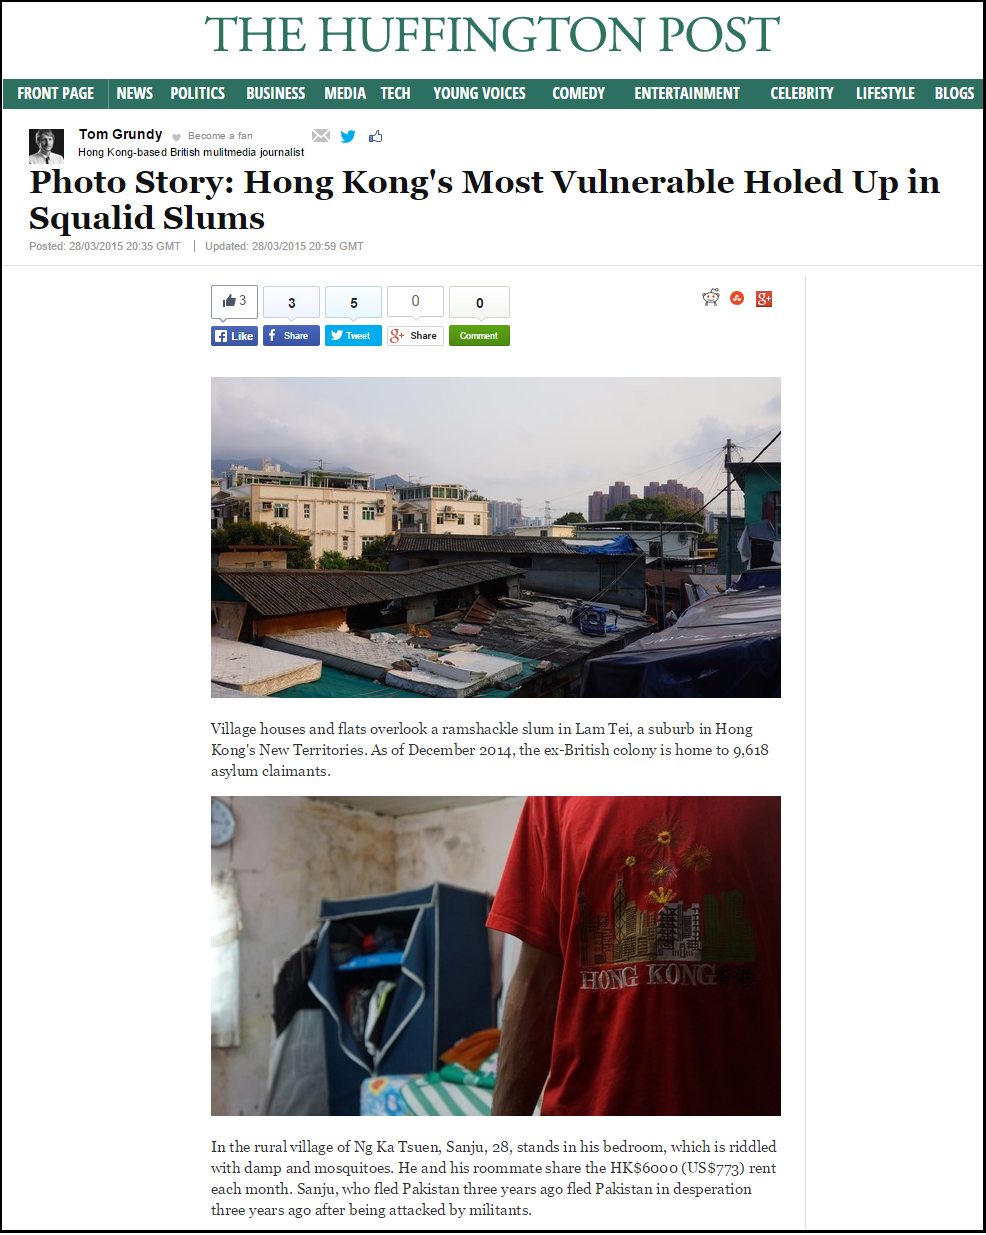 Huffington Post - HK's most vulnerable holed up in squalid slums (29Mar2015)